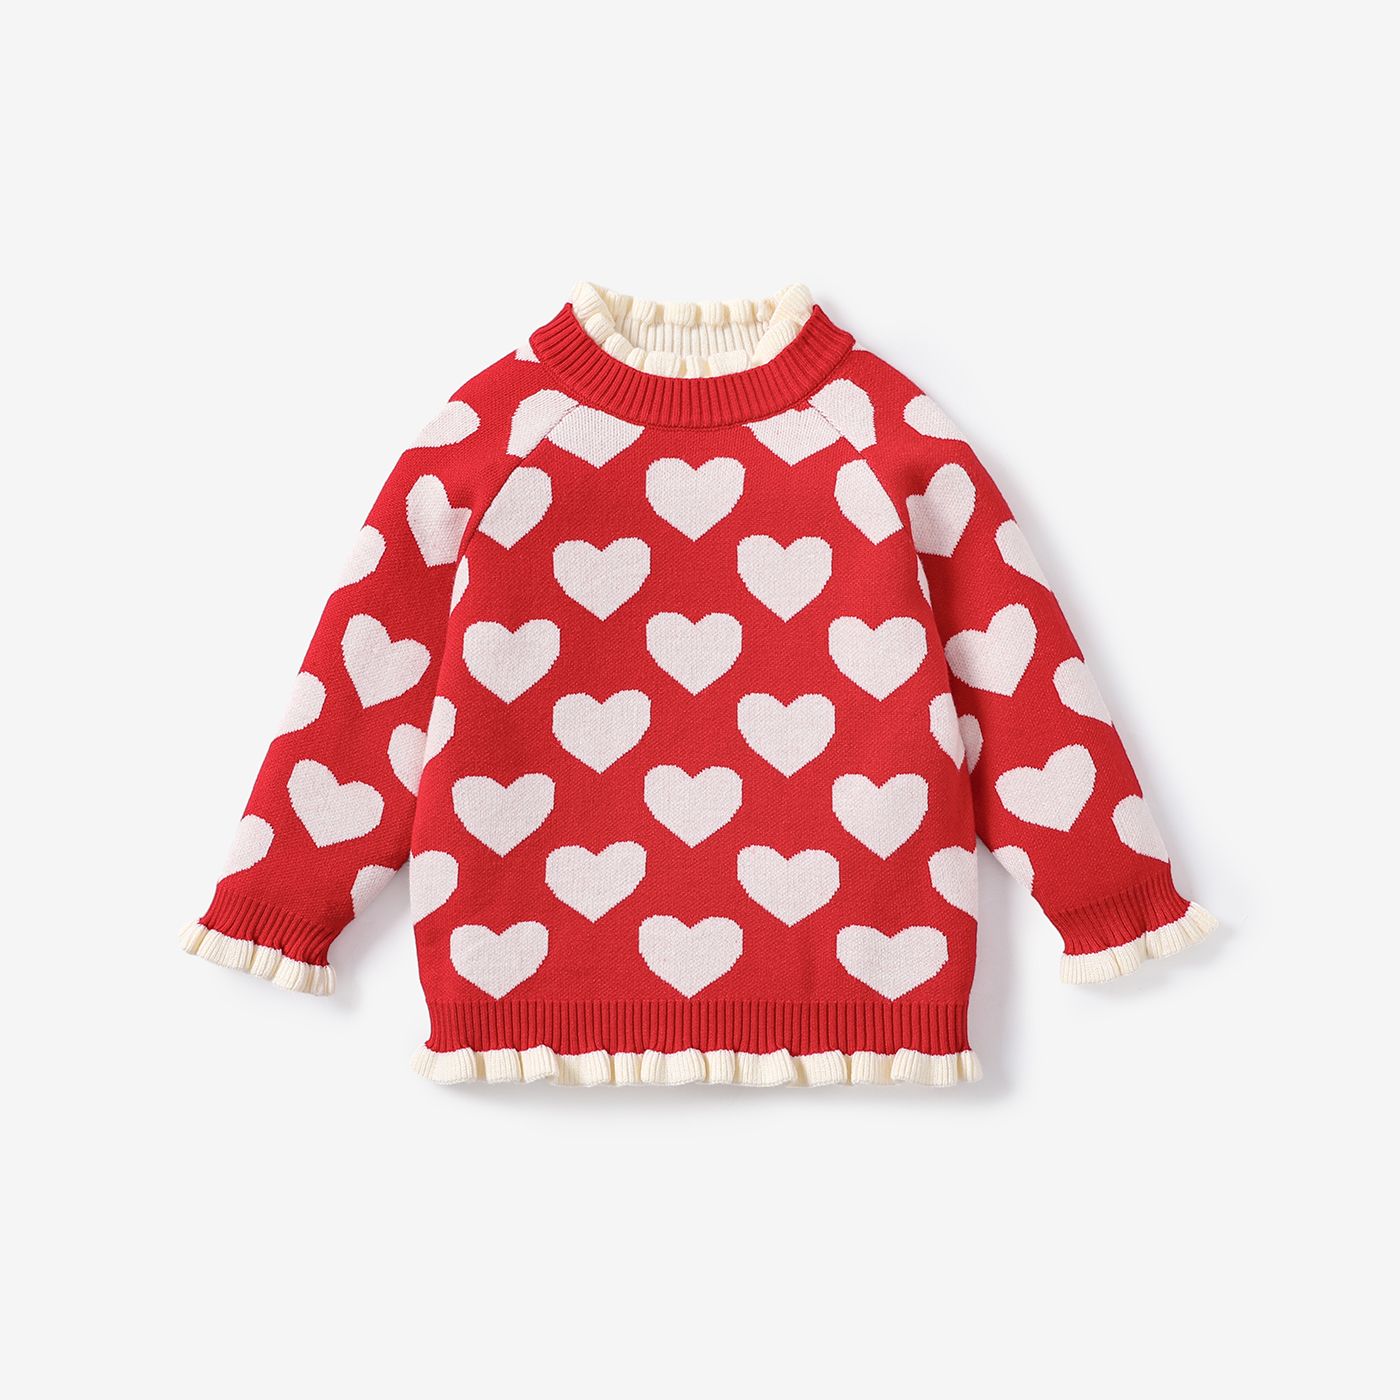 Toddler Girls Sweet Heart-shaped Faux Layered Design Sweater / Top